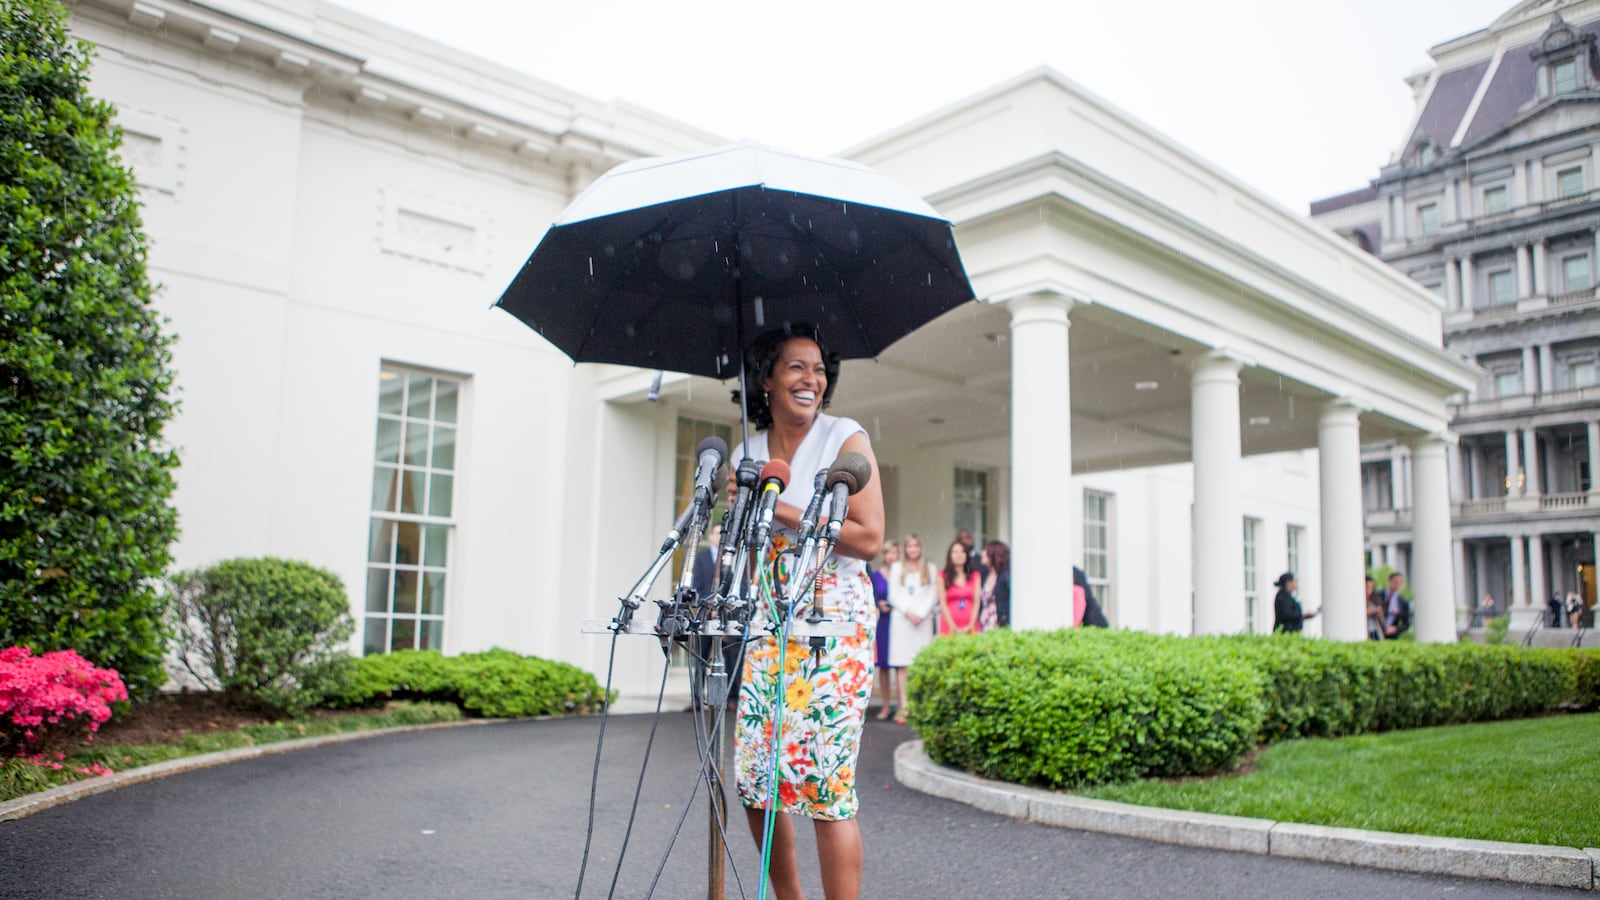 2016 National Teacher of the Year Jahana Hayes answers questions from reporters after being honored at the White House.  (Photo by Cheriss May/NurPhoto via Getty Images)